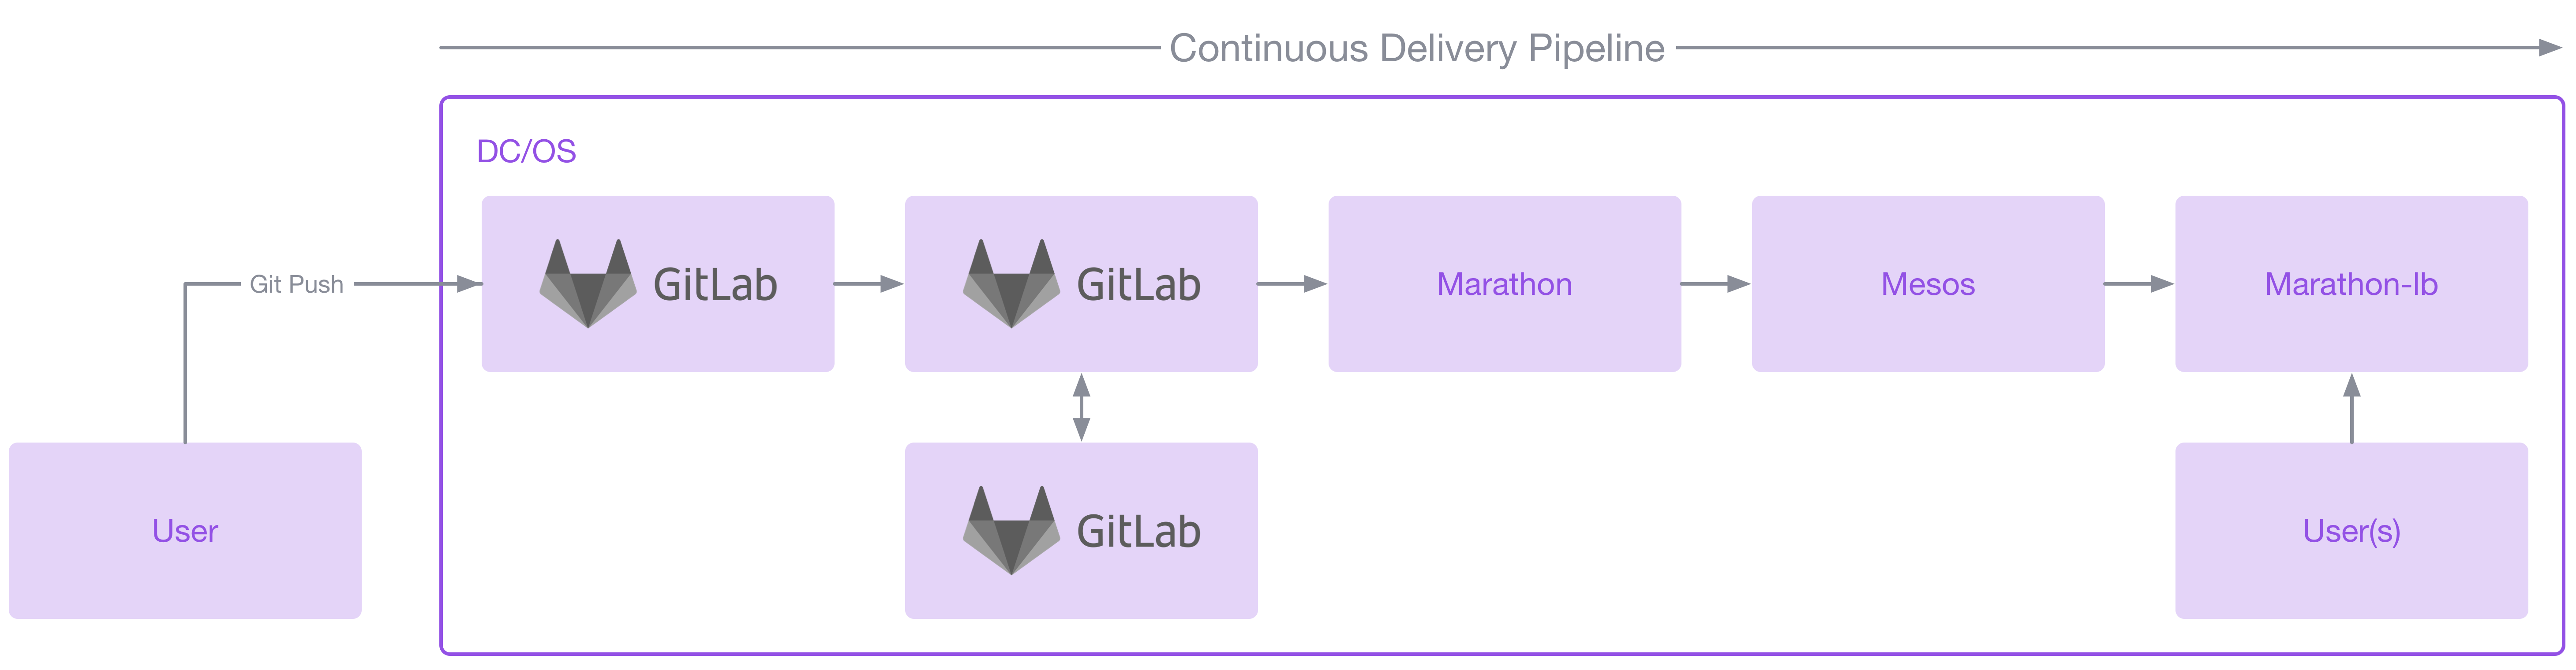 Deploy GitLab on DC/OS today